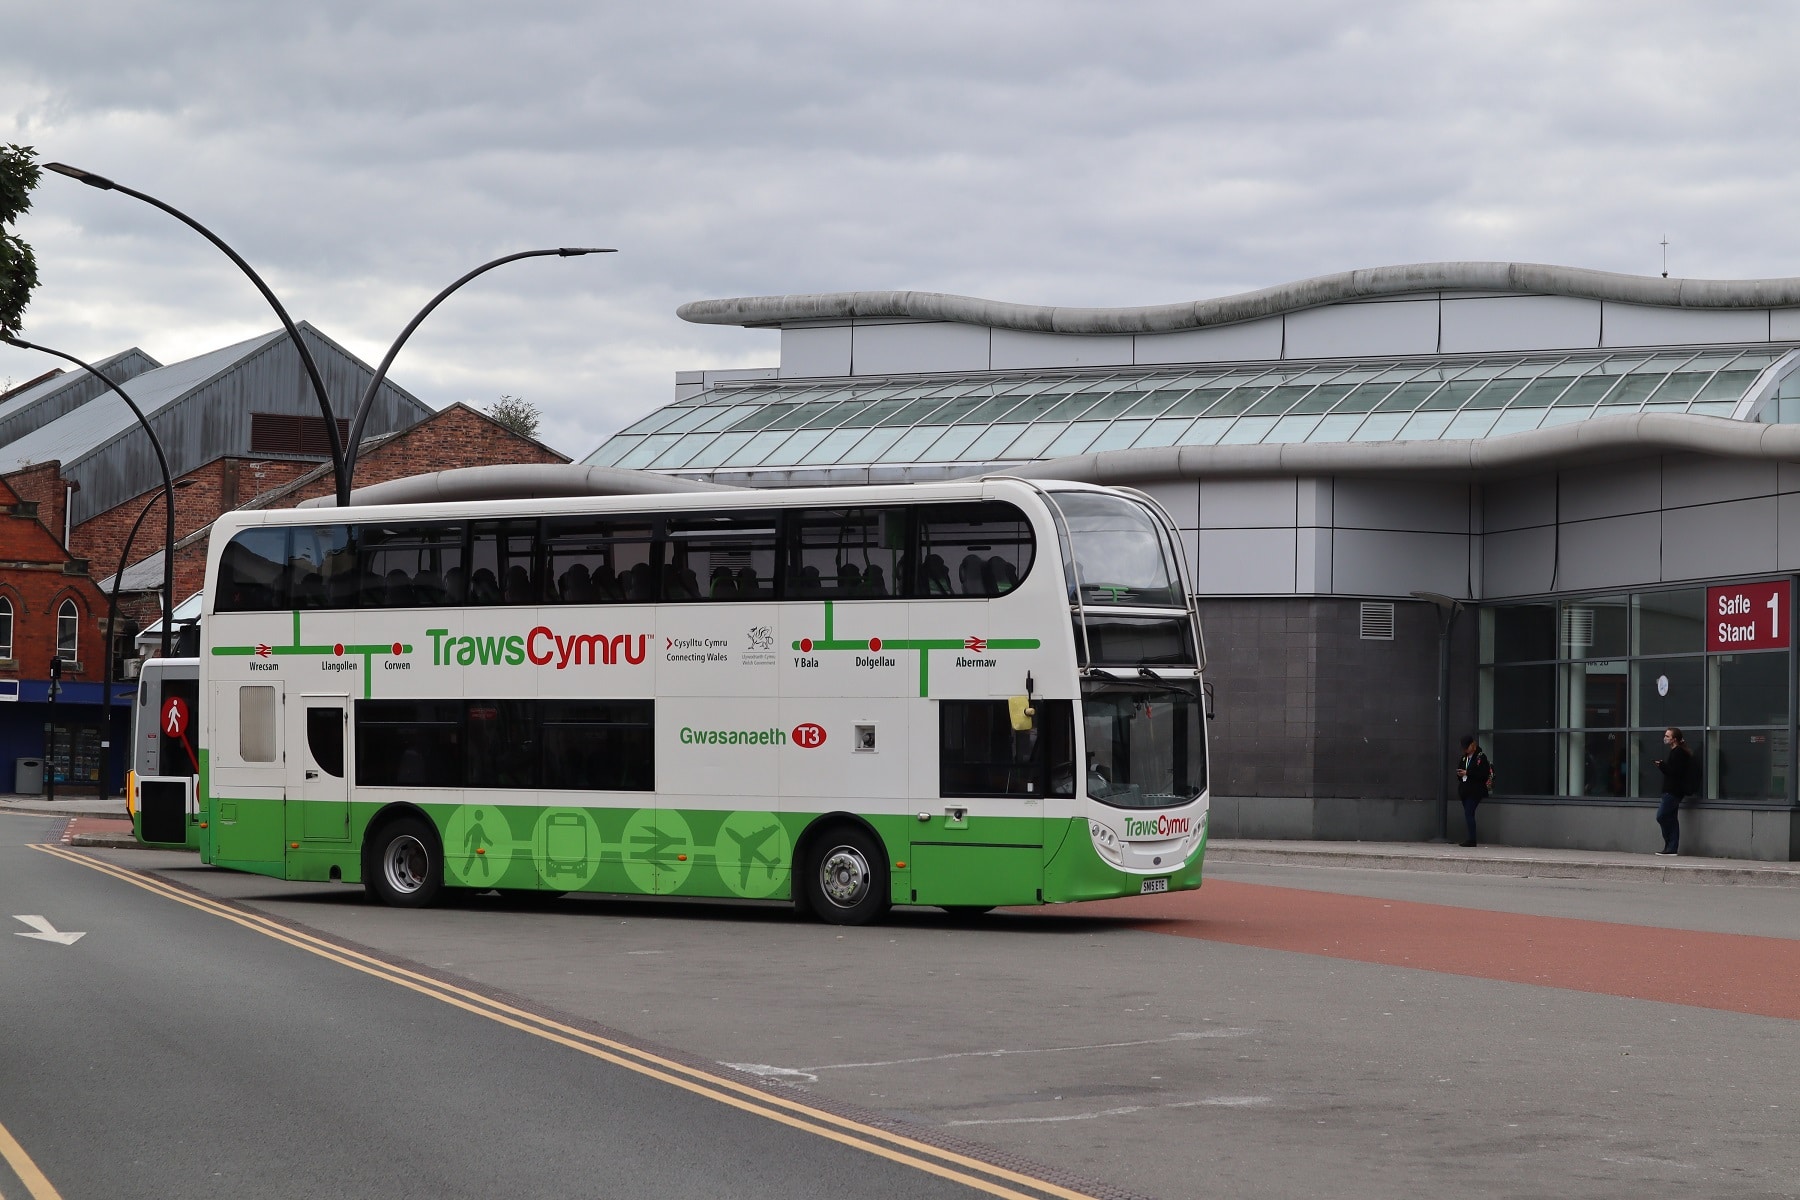 Legislation to enable bus franchising in Wales set to come